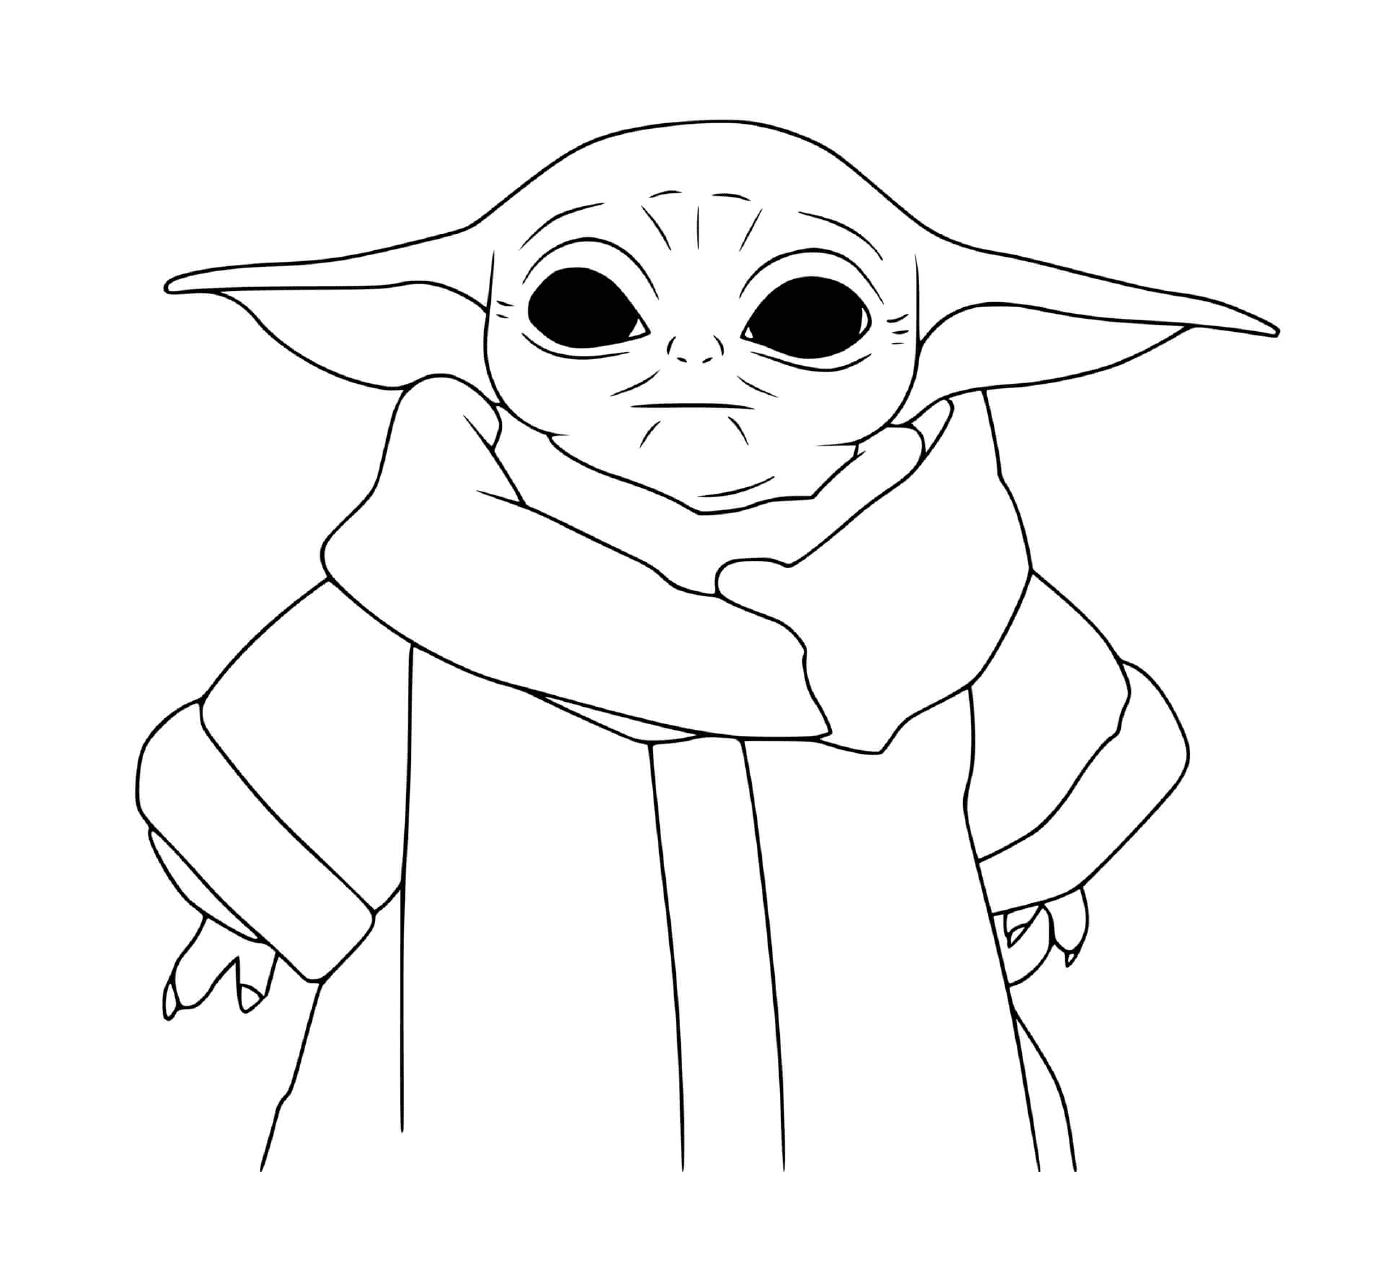  Young yoda with a warm neck 